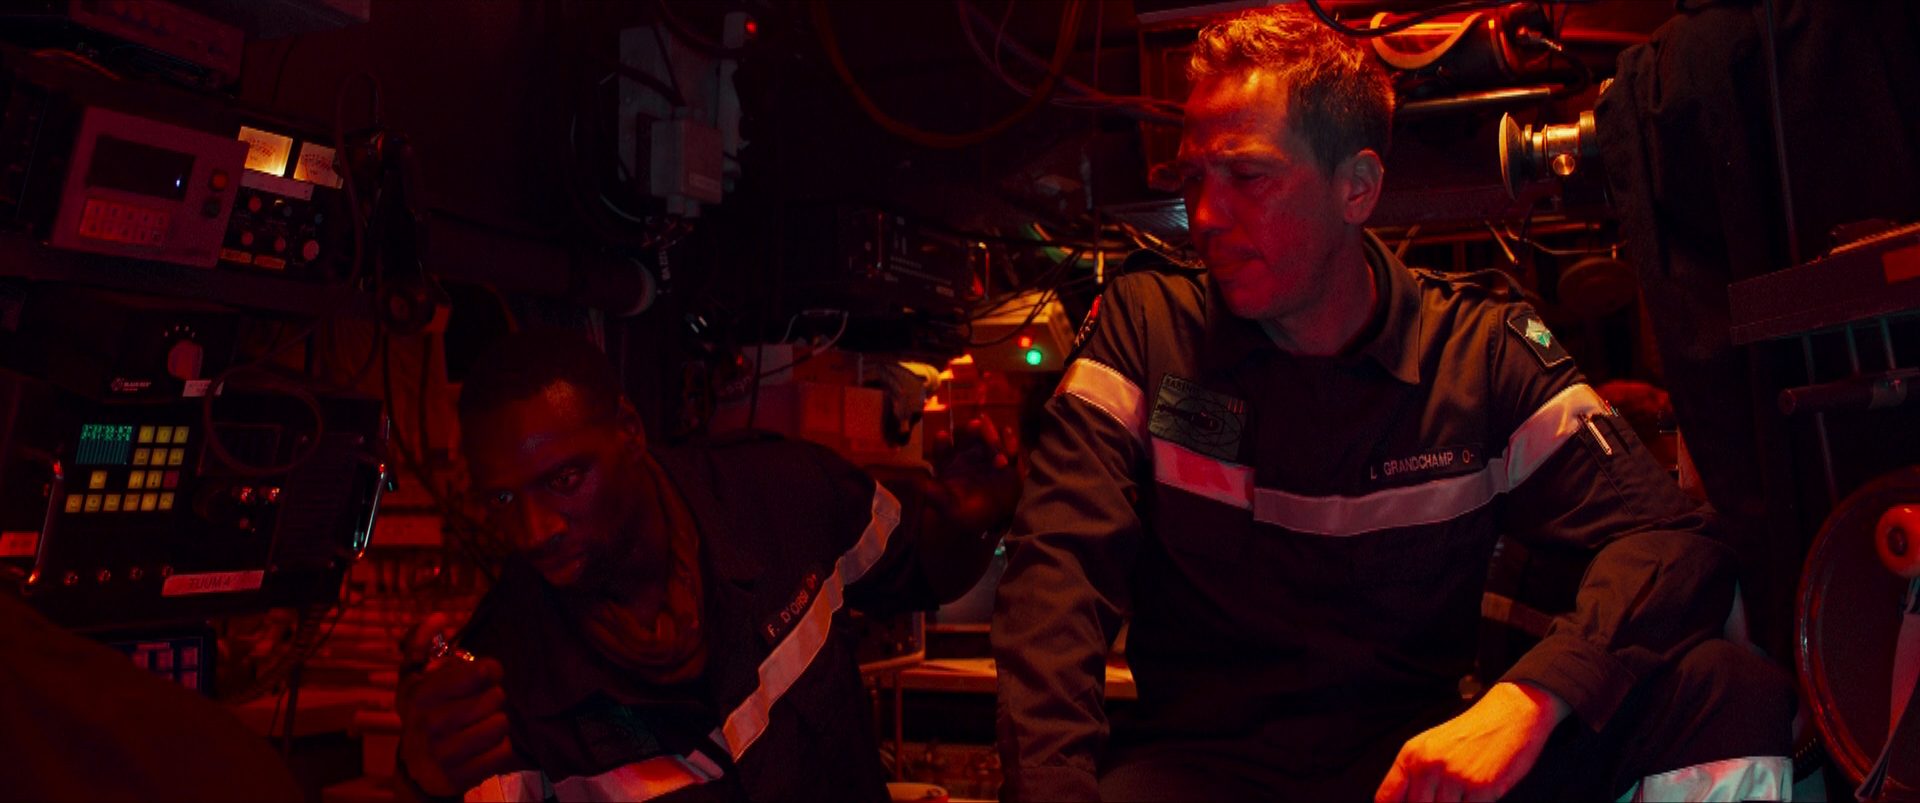 Omar Sy and Reda Kateb as officers on board a French submarine in a precarious situation, surrounded by numerous apparatuses.